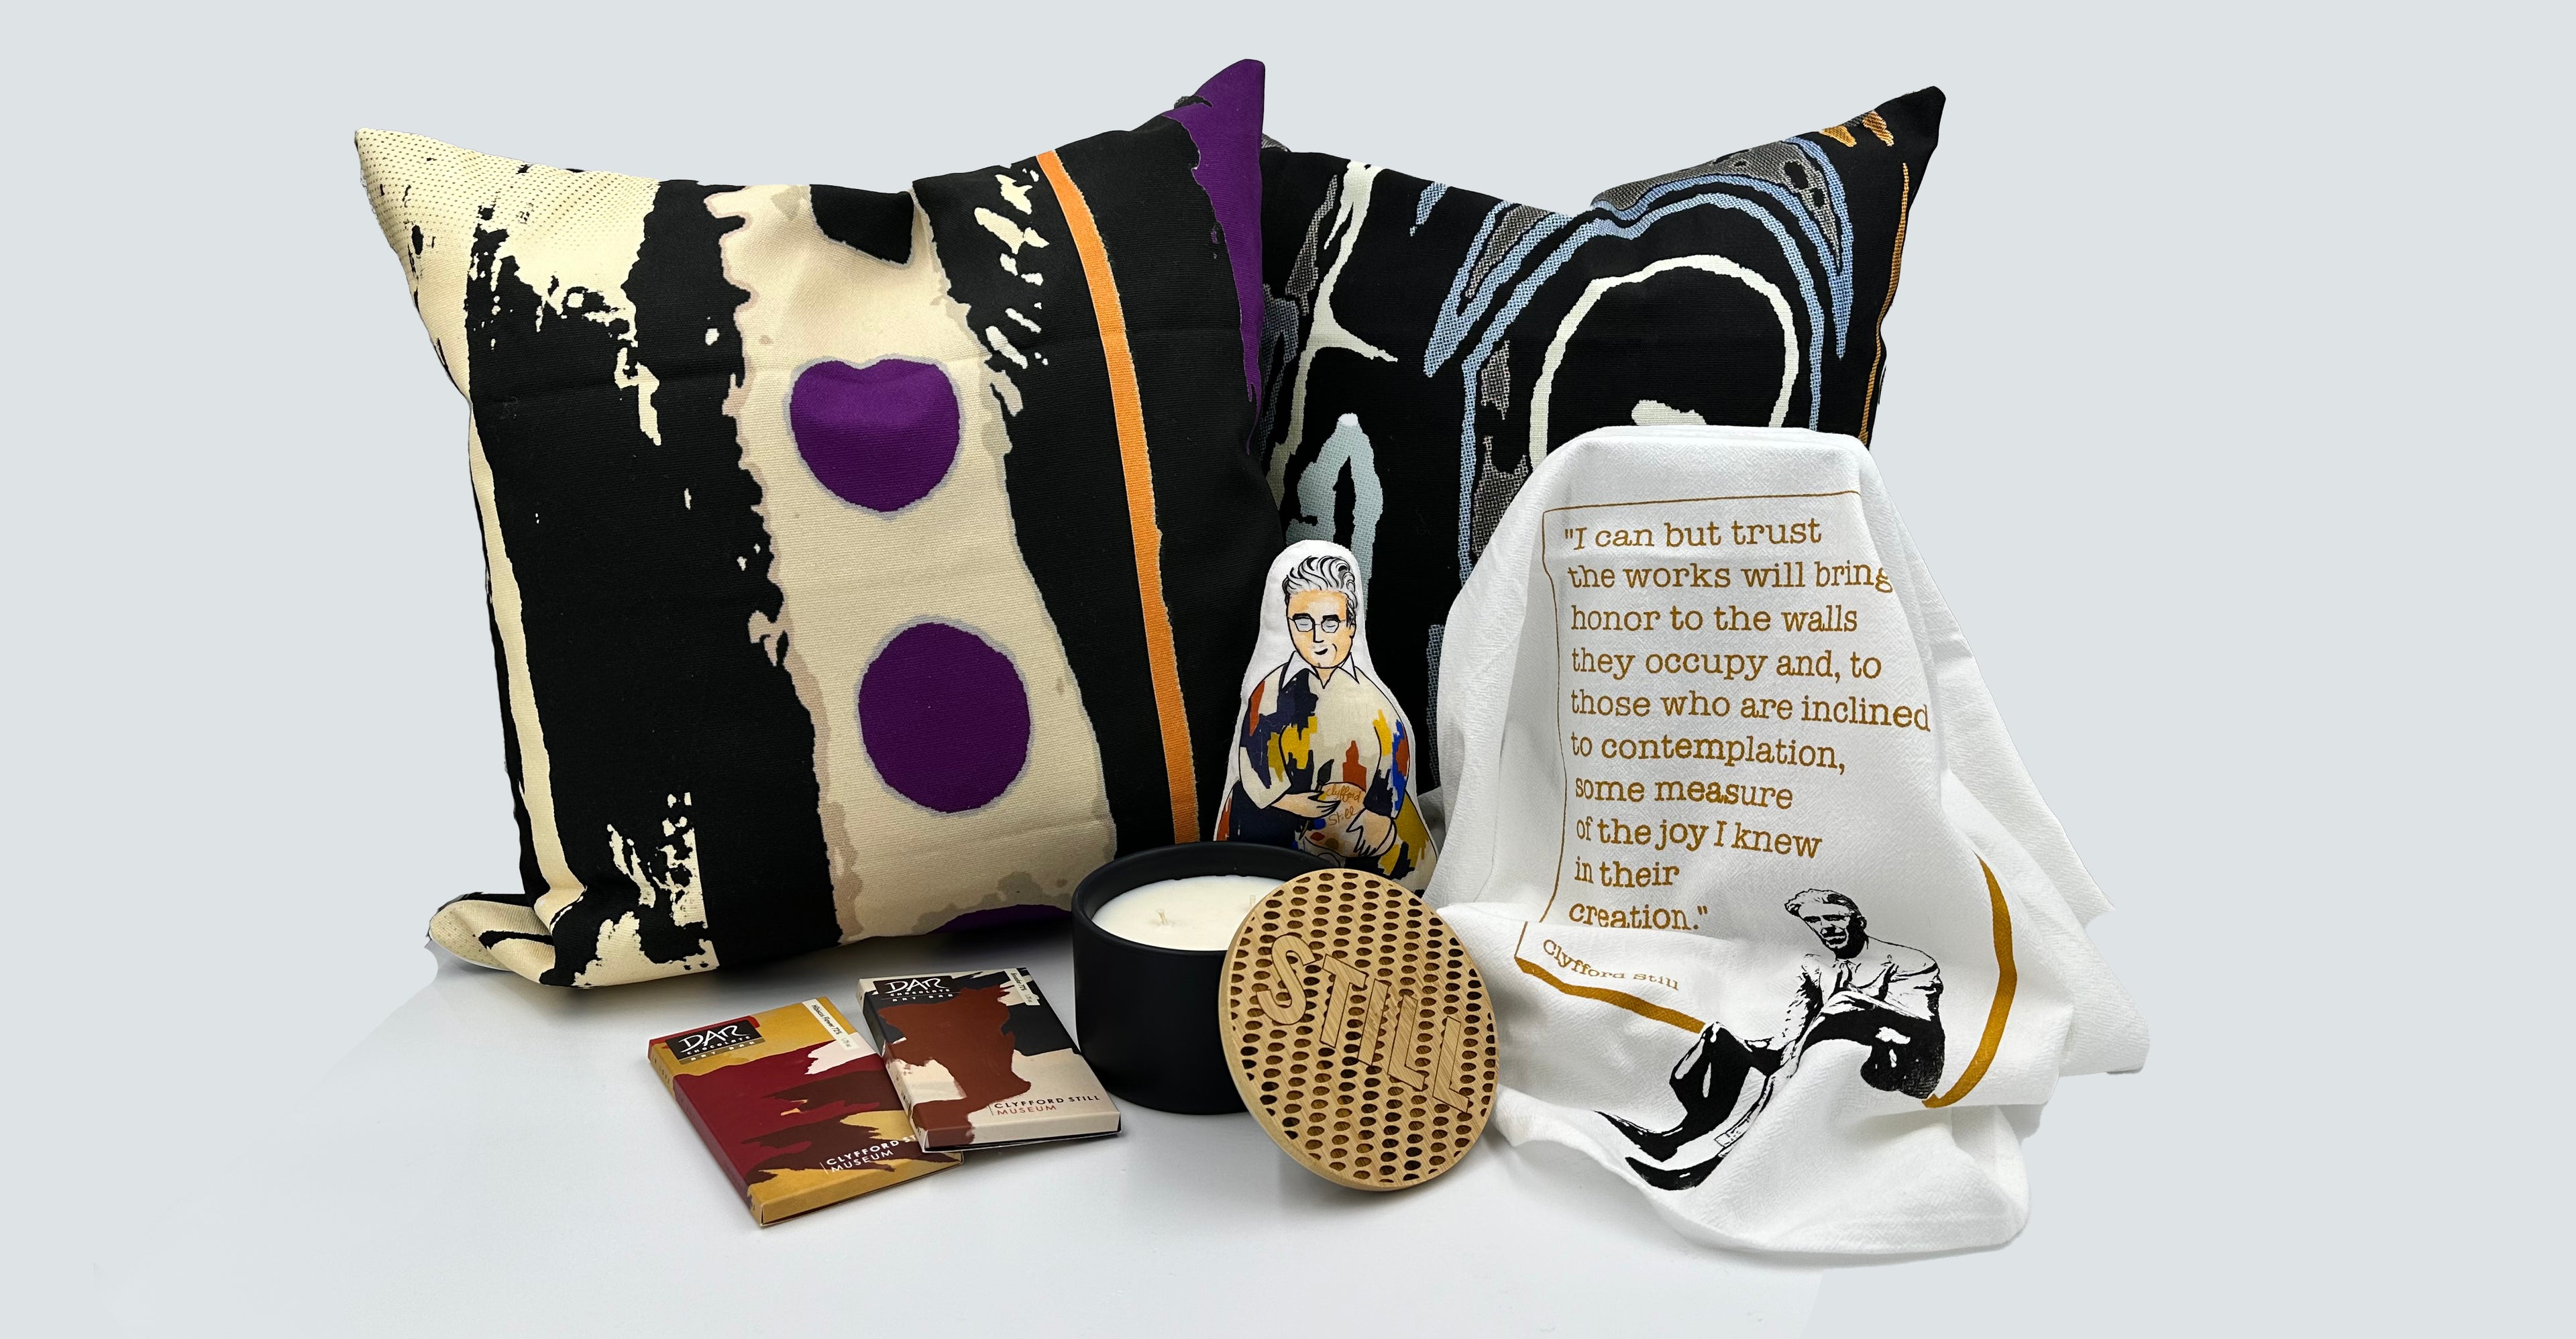 New in Shop items including decorative pillow, chocolate bars, candle, dishtowel, and rattle